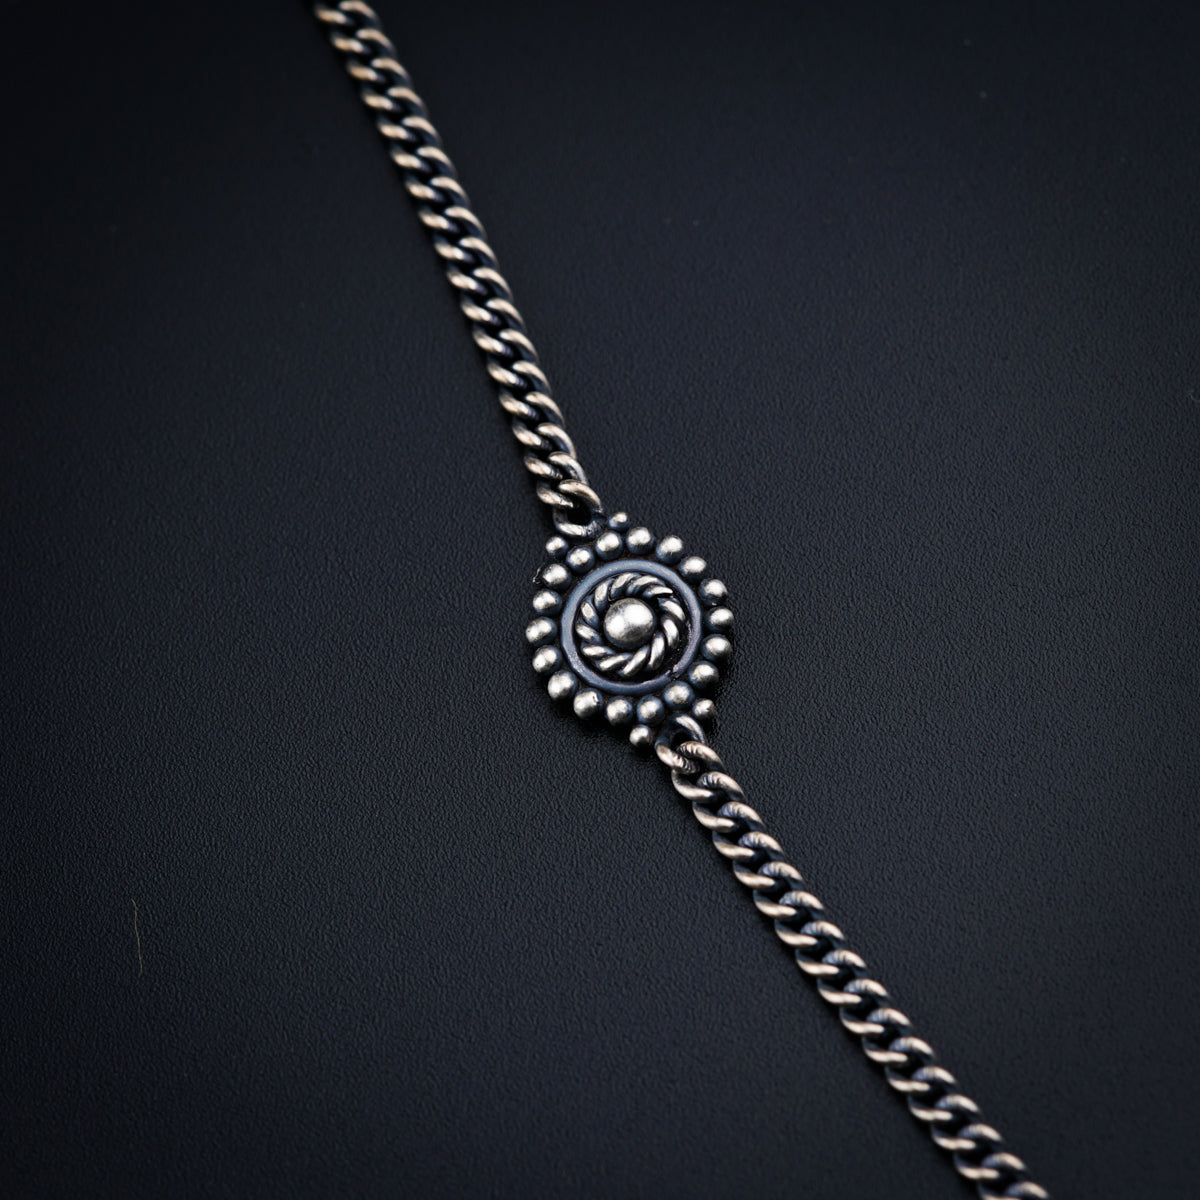 a close up of a chain with a watch on it